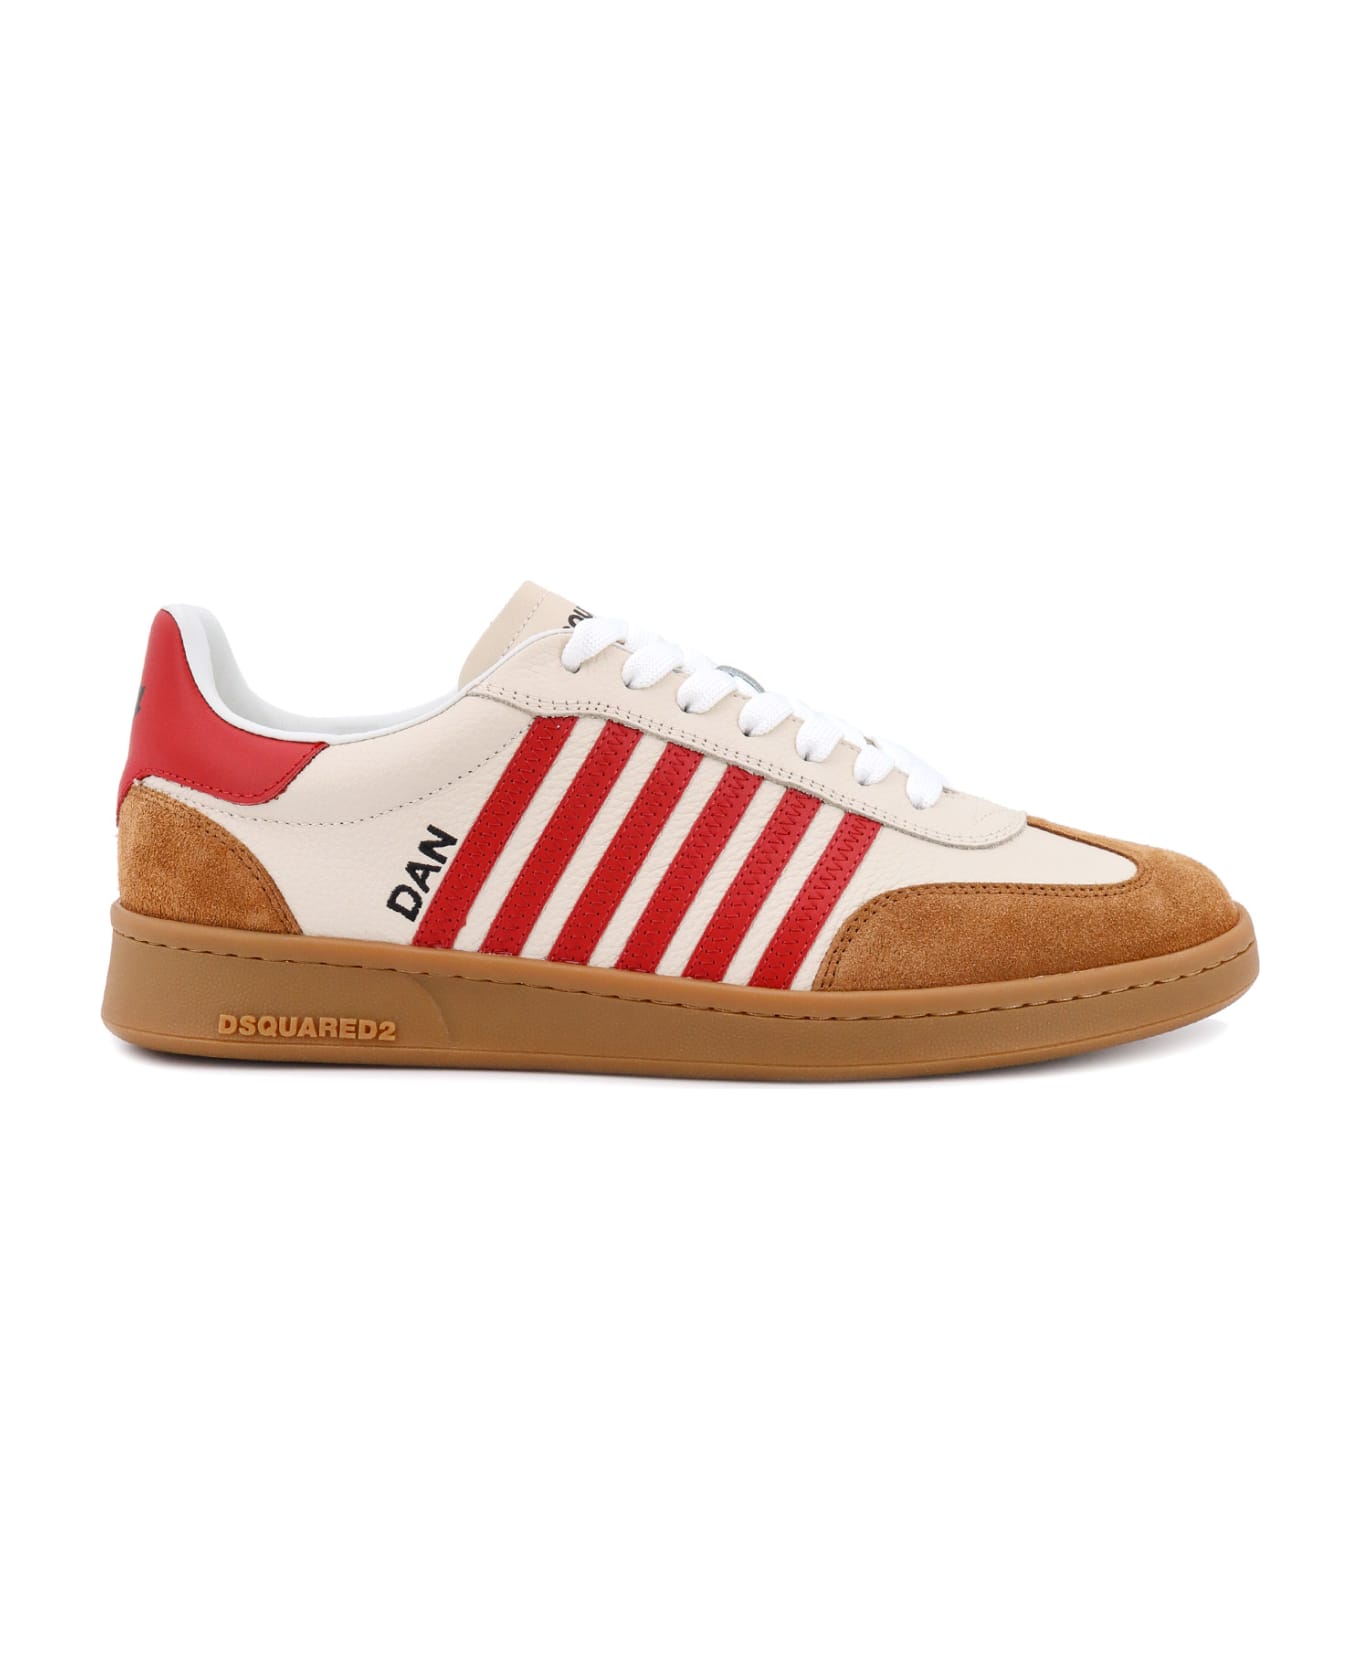 Dsquared2 Boxer Sneakers - Beige スニーカー